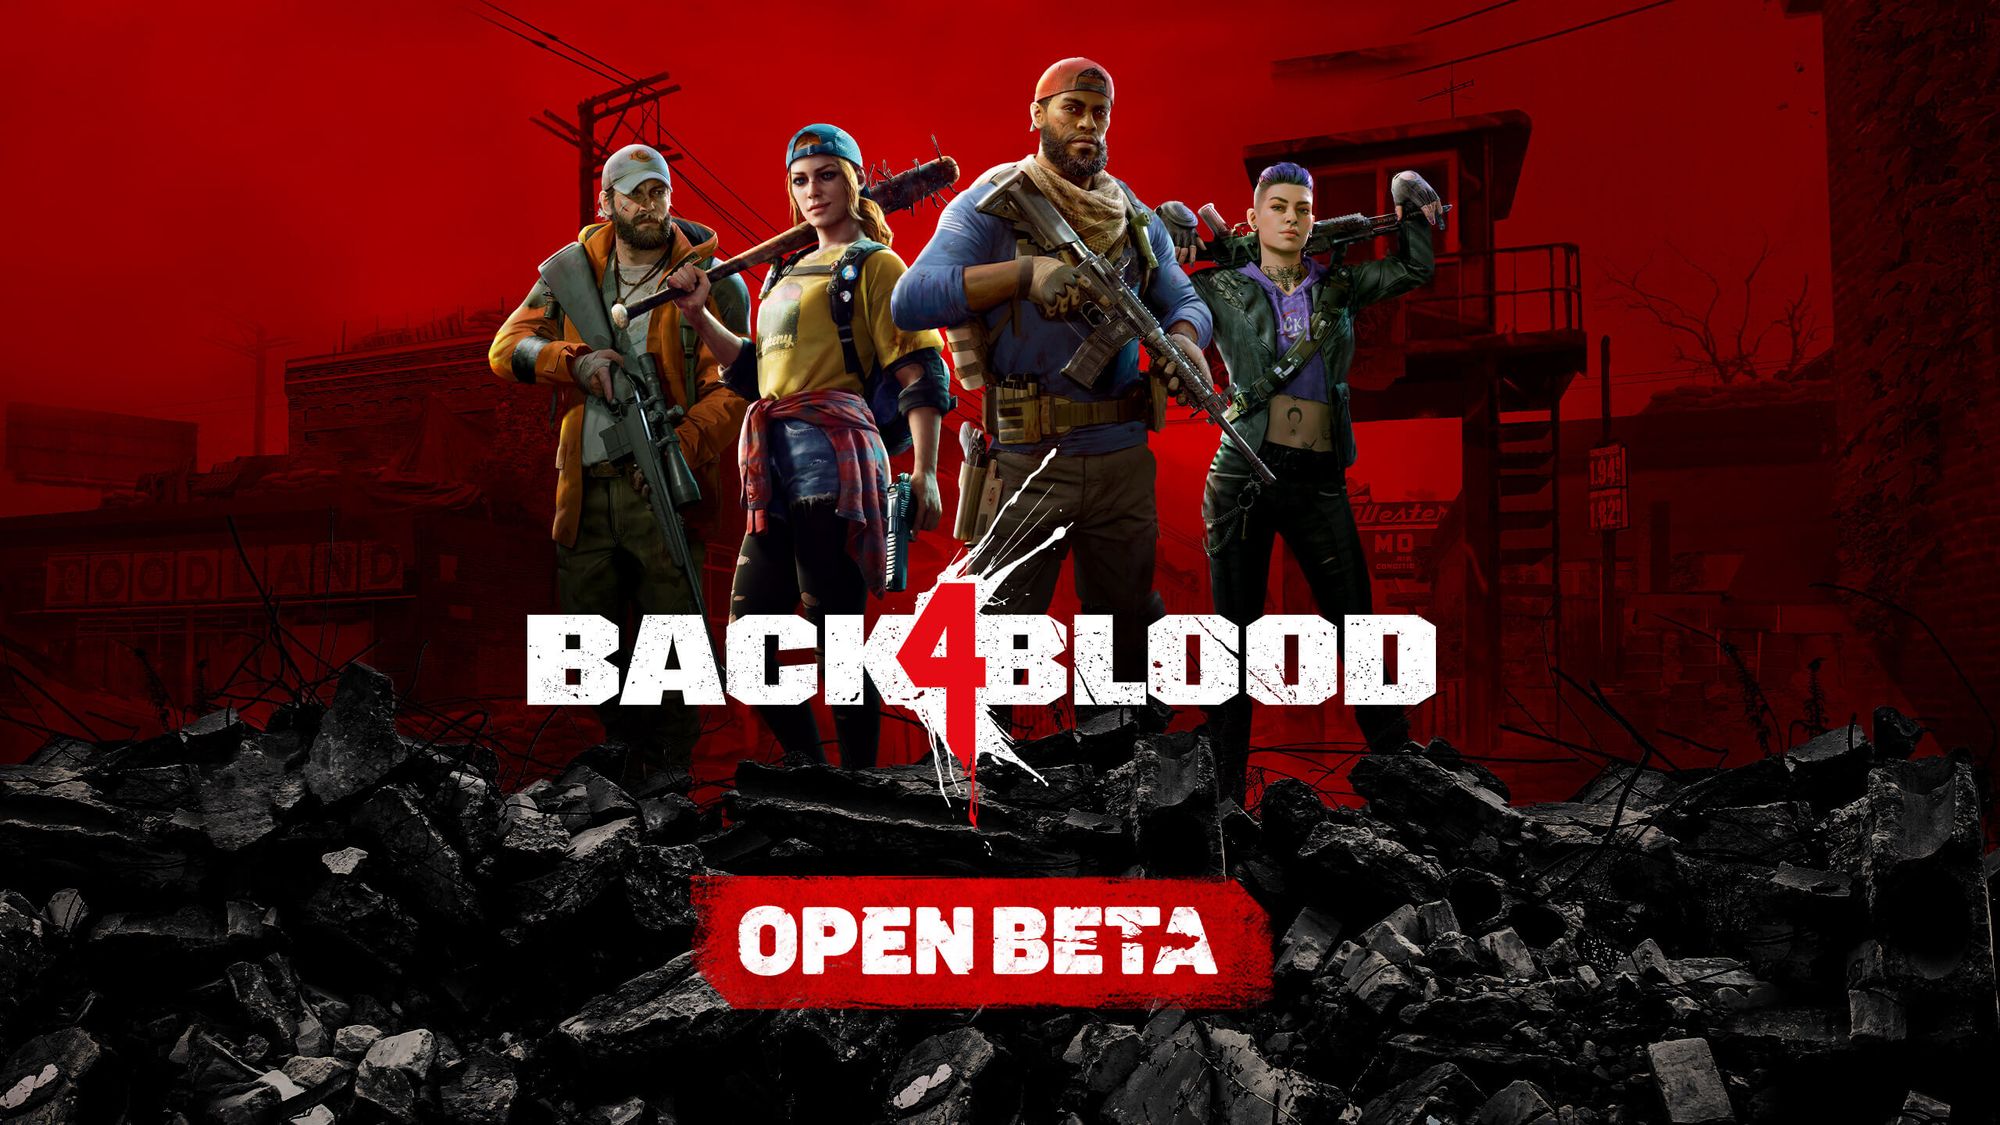 This game is terrible and I am extremely disappointed : r/Back4Blood